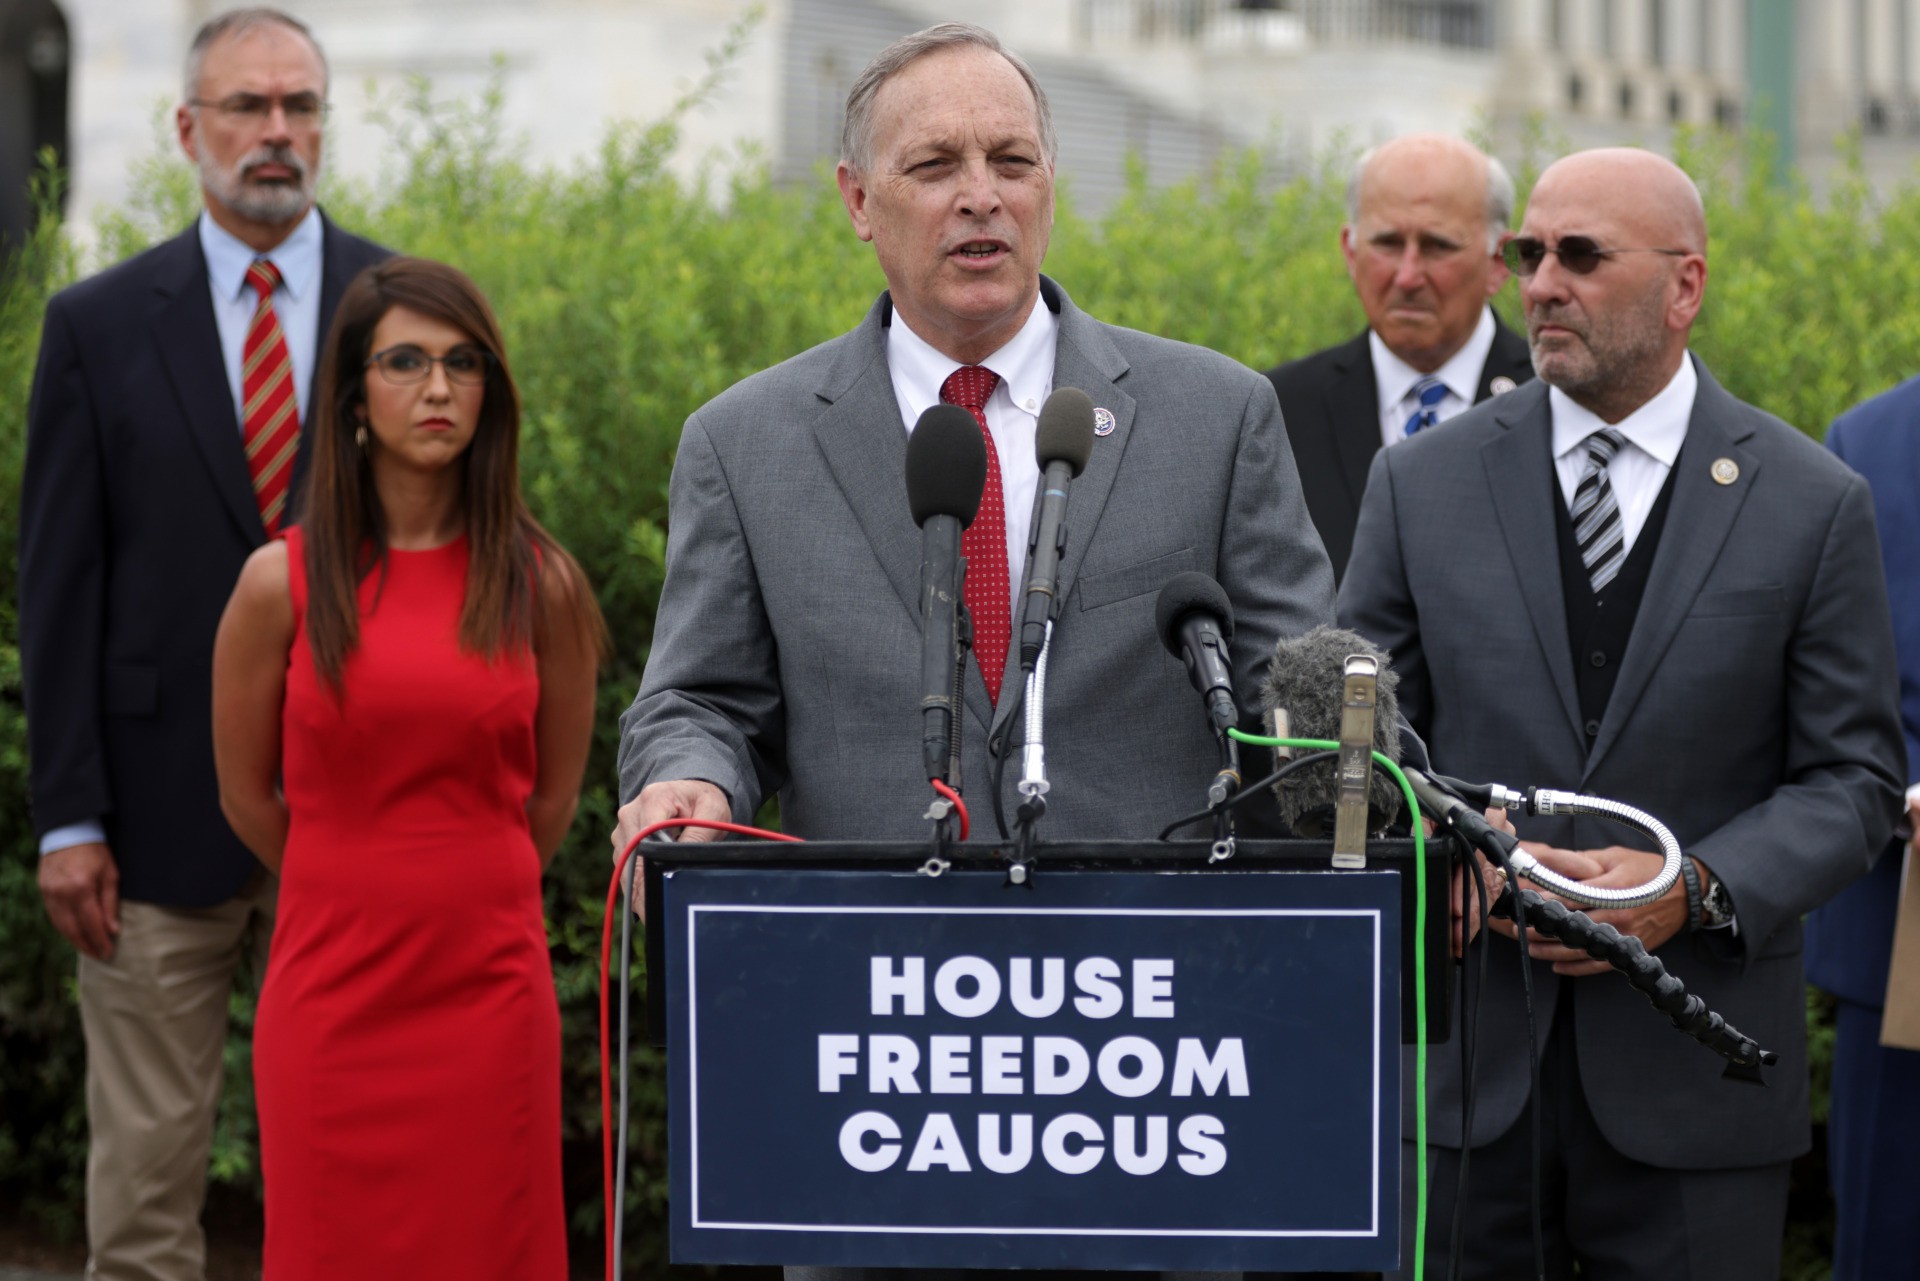 WASHINGTON, DC - AUGUST 31: Chair of the Freedom Caucus U.S. Andy Biggs (R-AZ) (3rd L) speaks as caucus members listen during a news conference in front of the U.S. Capitol August 31, 2021 in Washington, DC. The Freedom Caucus held a news conference to discuss the U.S. withdrawal from Afghanistan and to call on President Joe Biden, Defense Secretary Lloyd Austin and Chairman of the Joint Chiefs of Staff Gen. Mark Milley to resign because of a “disastrous” evacuation operation. The caucus also announced that an impeachment resolution against Secretary of State Antony Blinken has been filed. (Photo by Alex Wong/Getty Images)